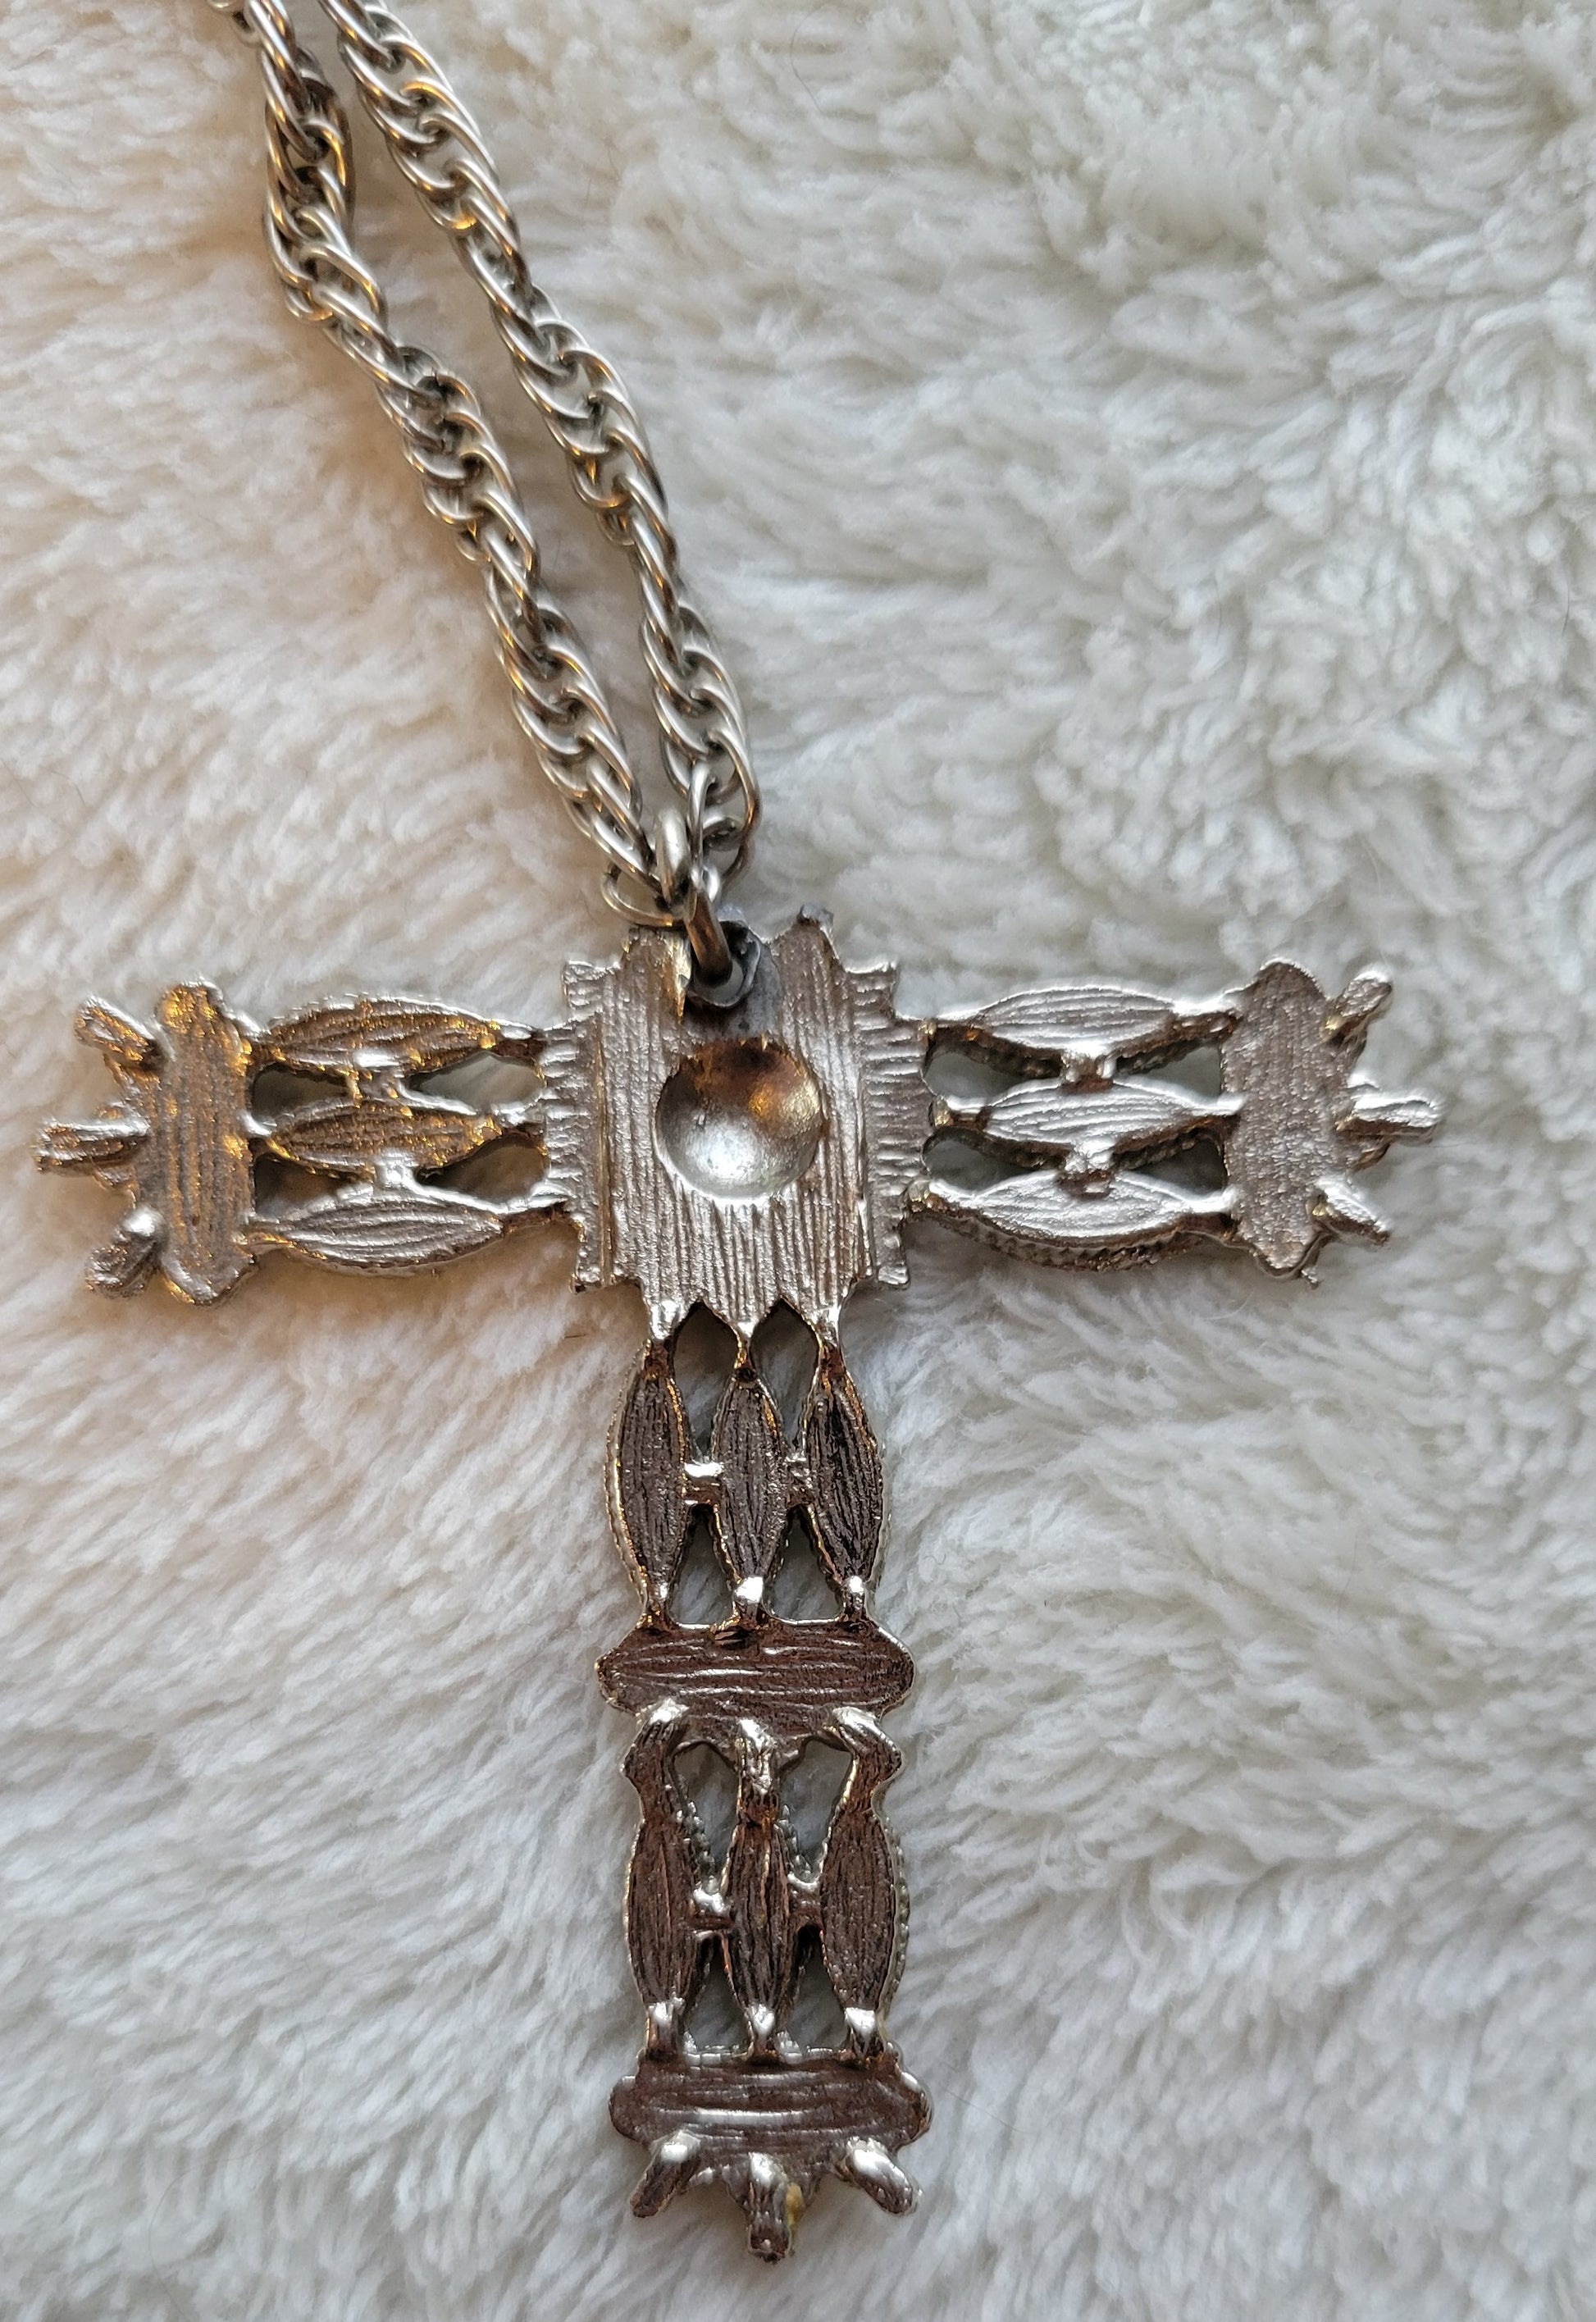 Antique Tau cross necklace, Catholic Franciscan order. Back view.